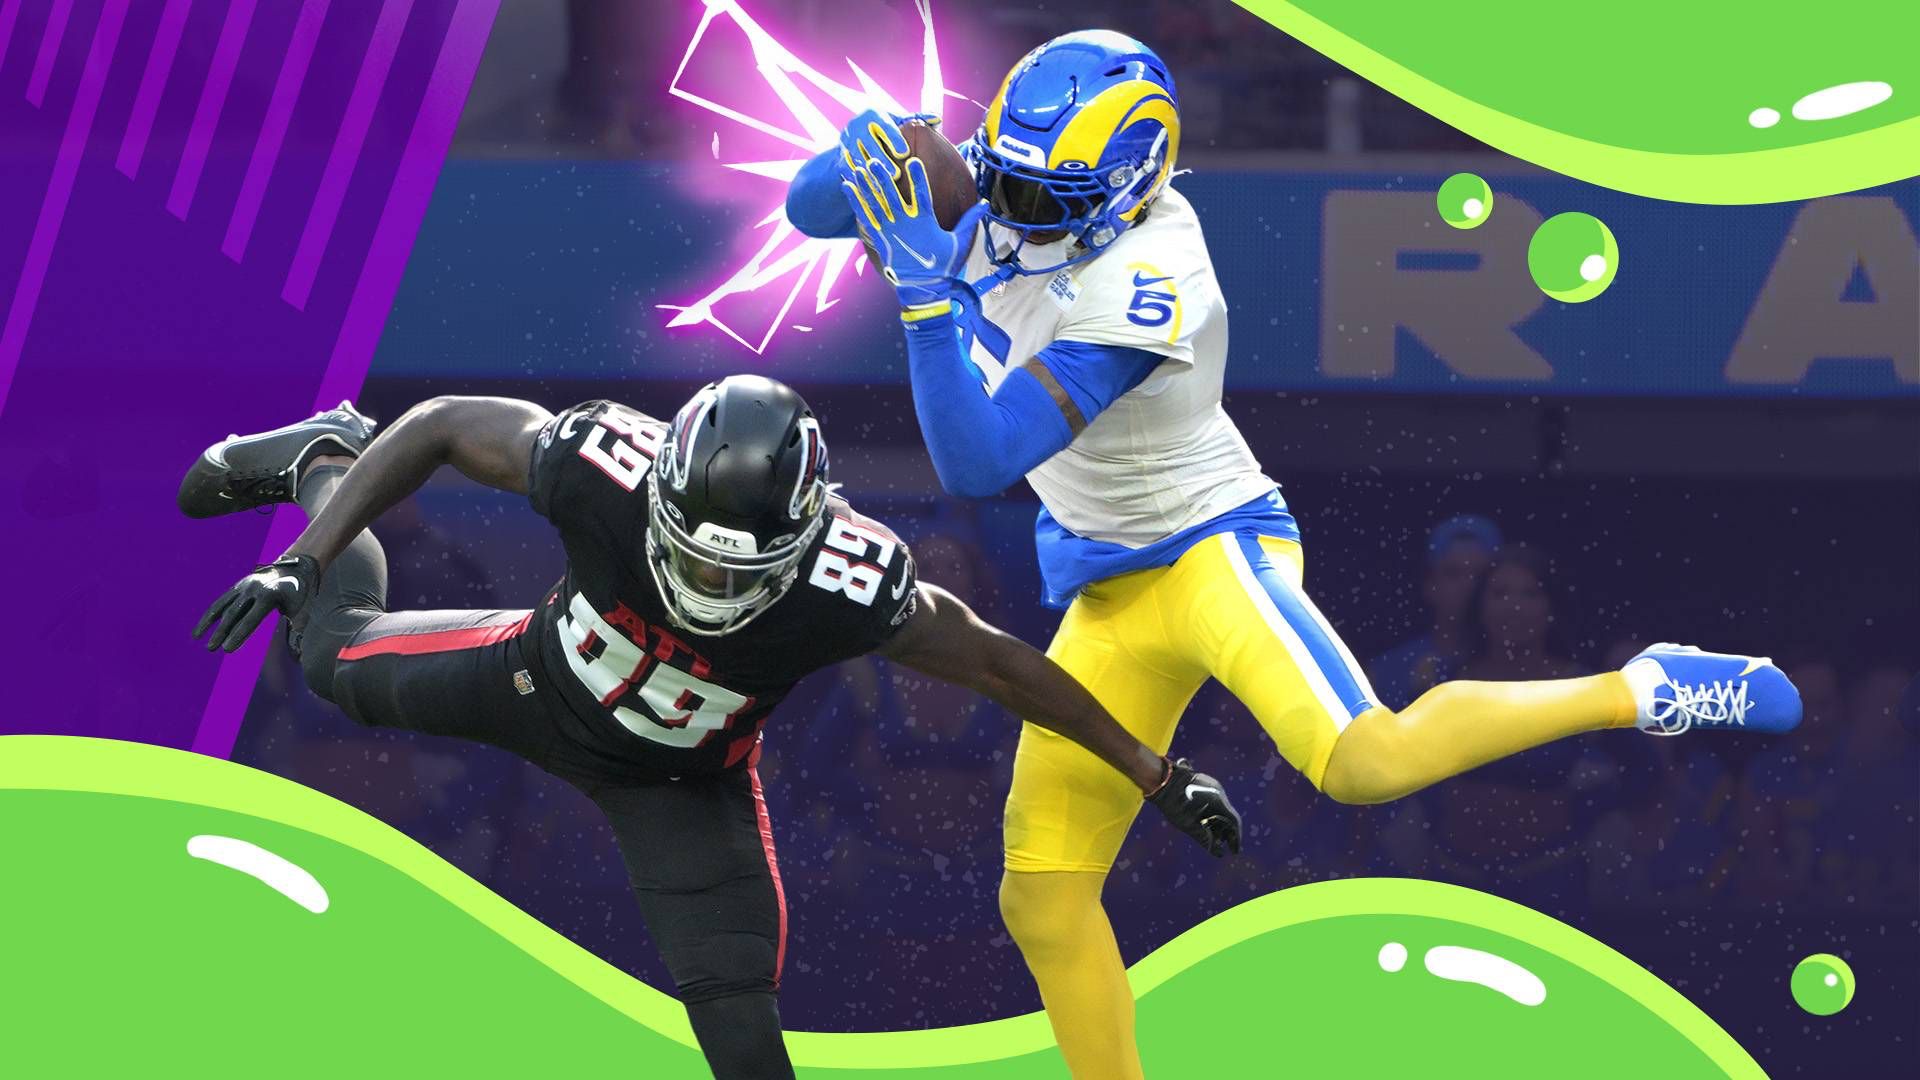 Nickelodeon and CBS Sports Announce Slime-Filled NFL 'Nickmas' Game